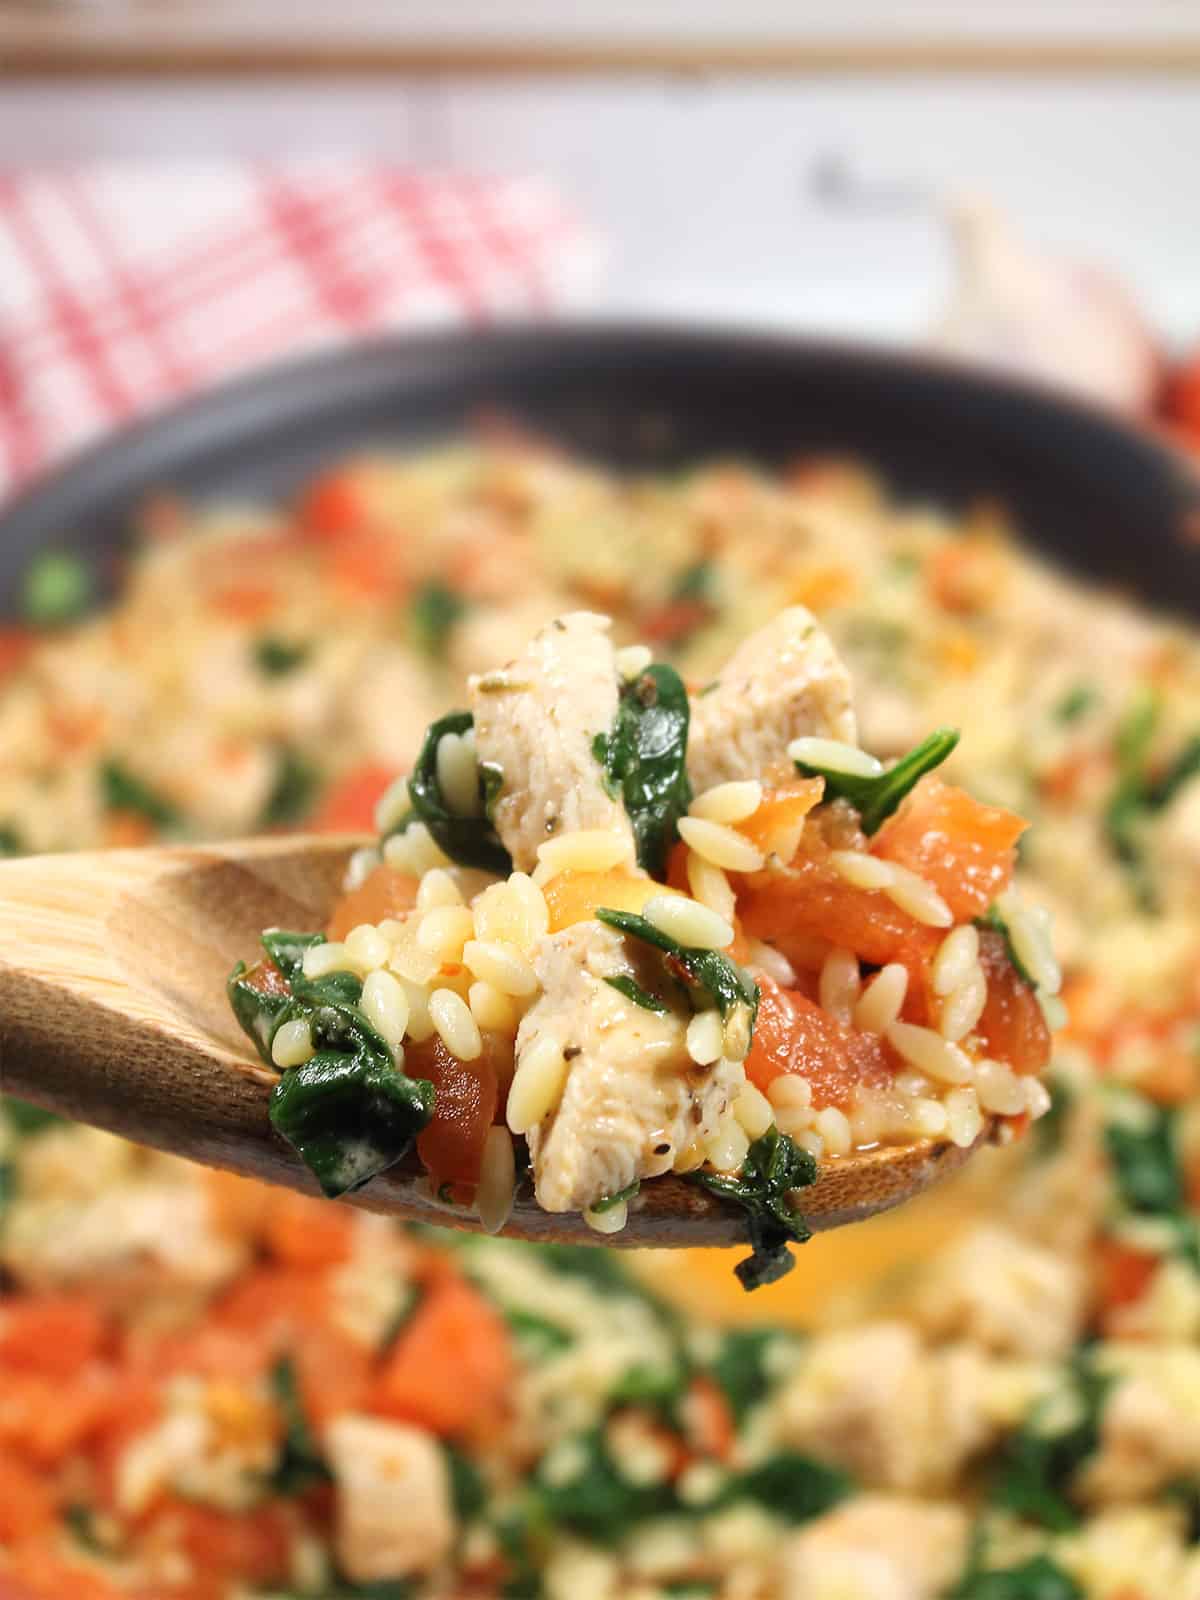 Spoonful of chicken and orzo over skillet.